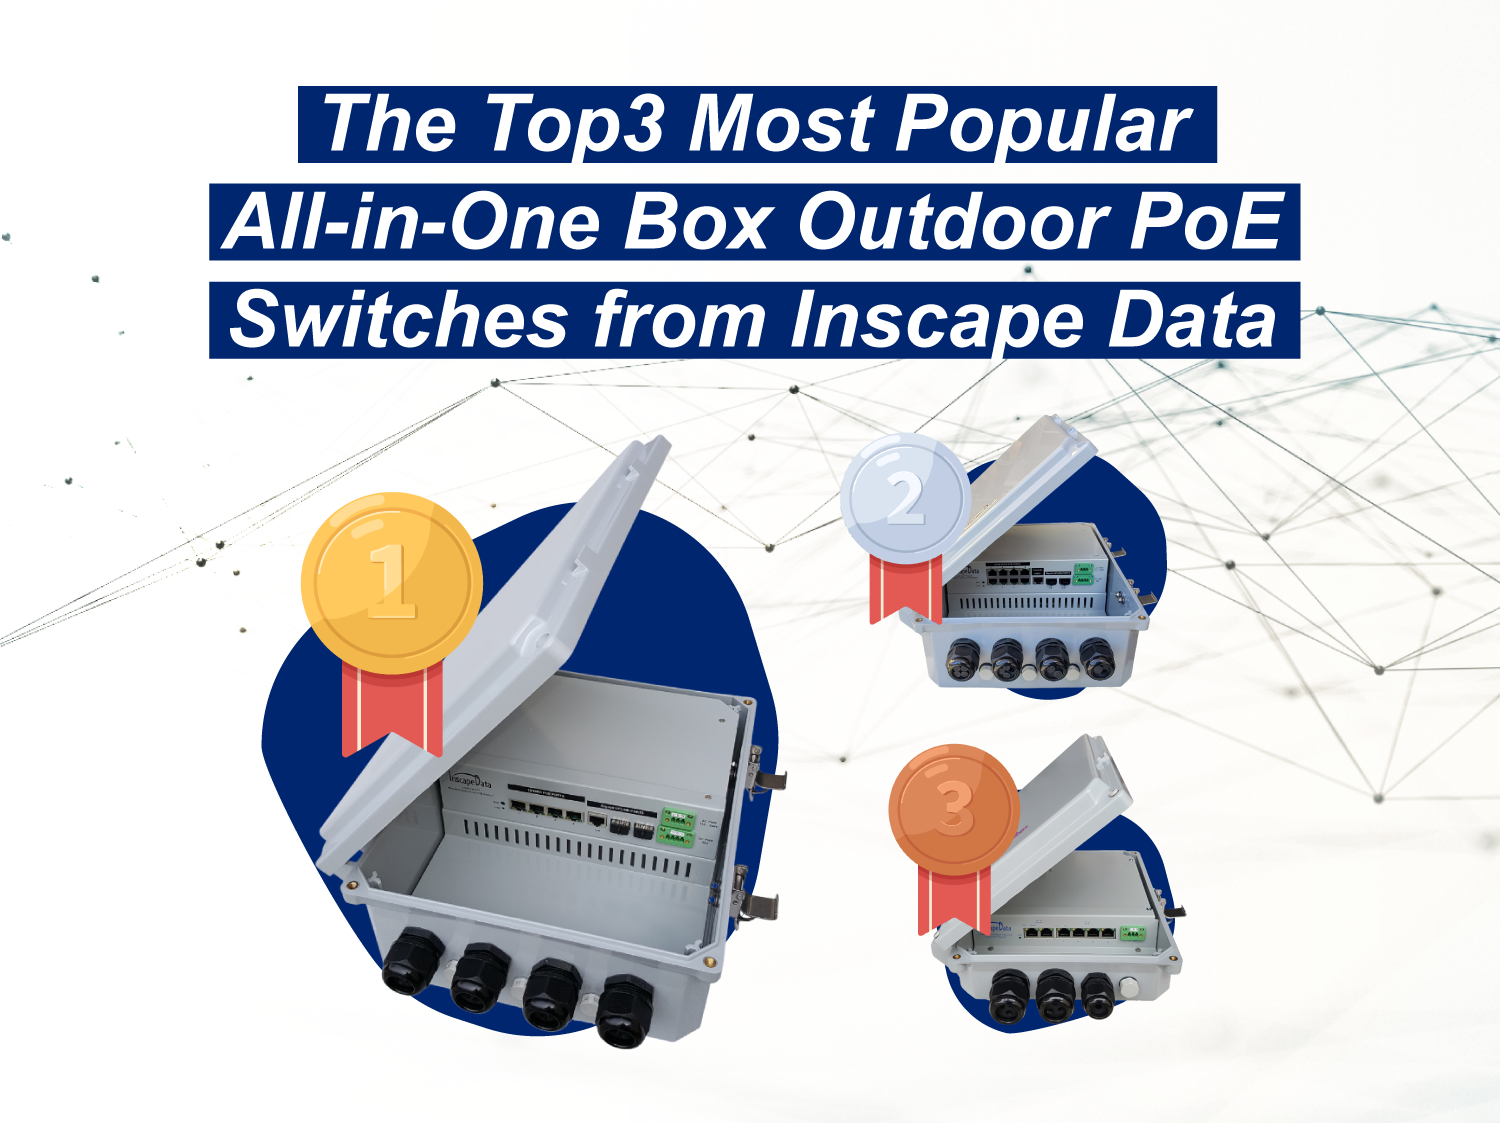 The Top 3 Most Popular All-in-One Box Outdoor PoE Switches from Inscape Data